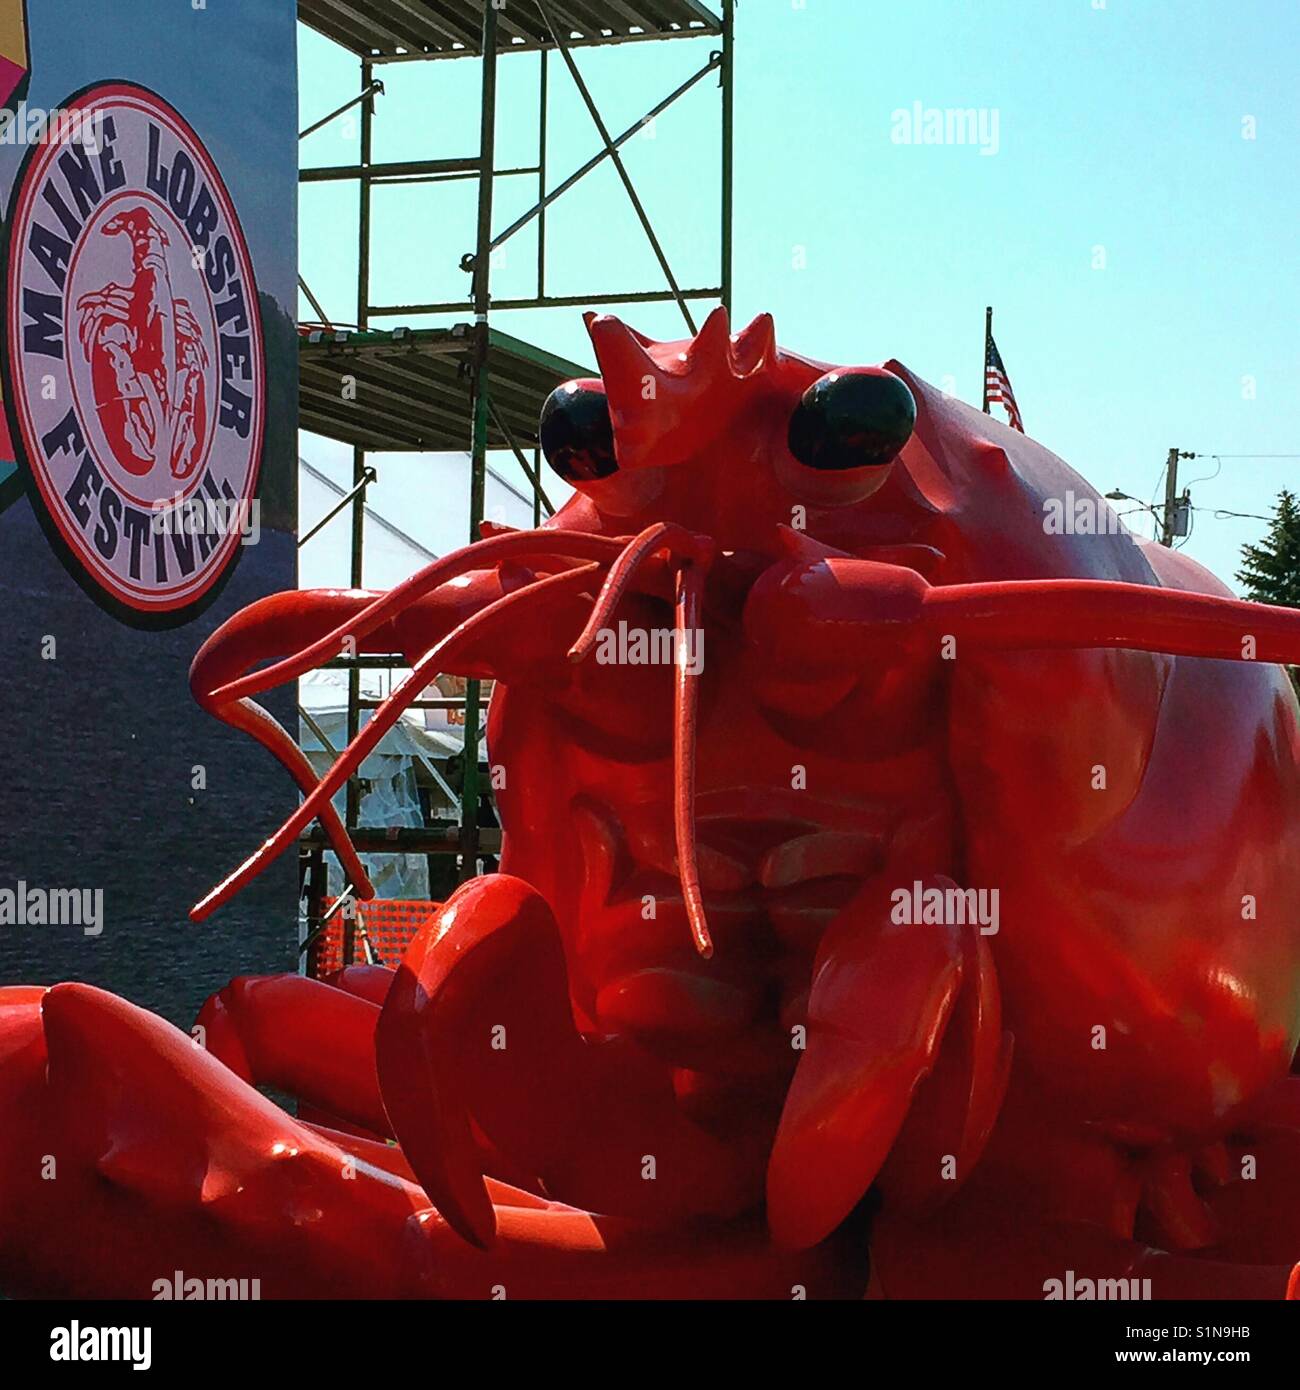 Maine Lobster Festival, Rockland Maine Stock Photo